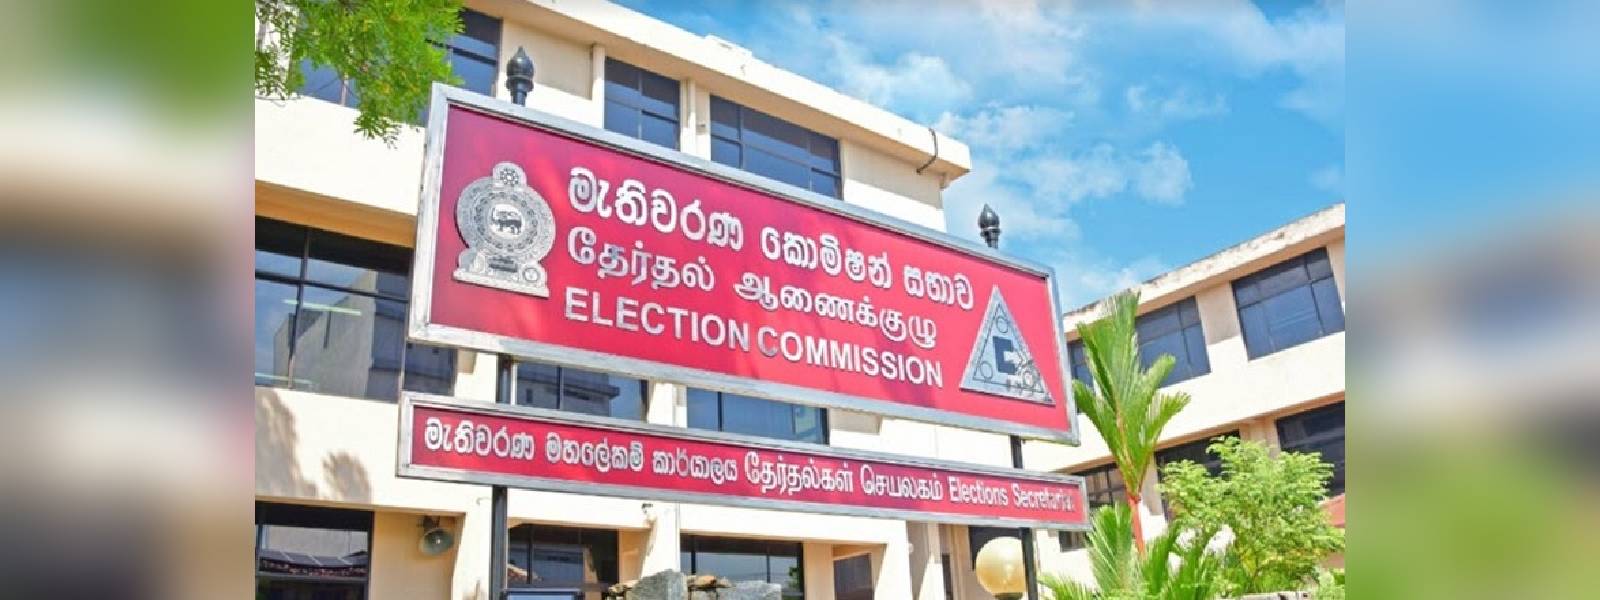 Elections Commission summons parties to discuss crisis